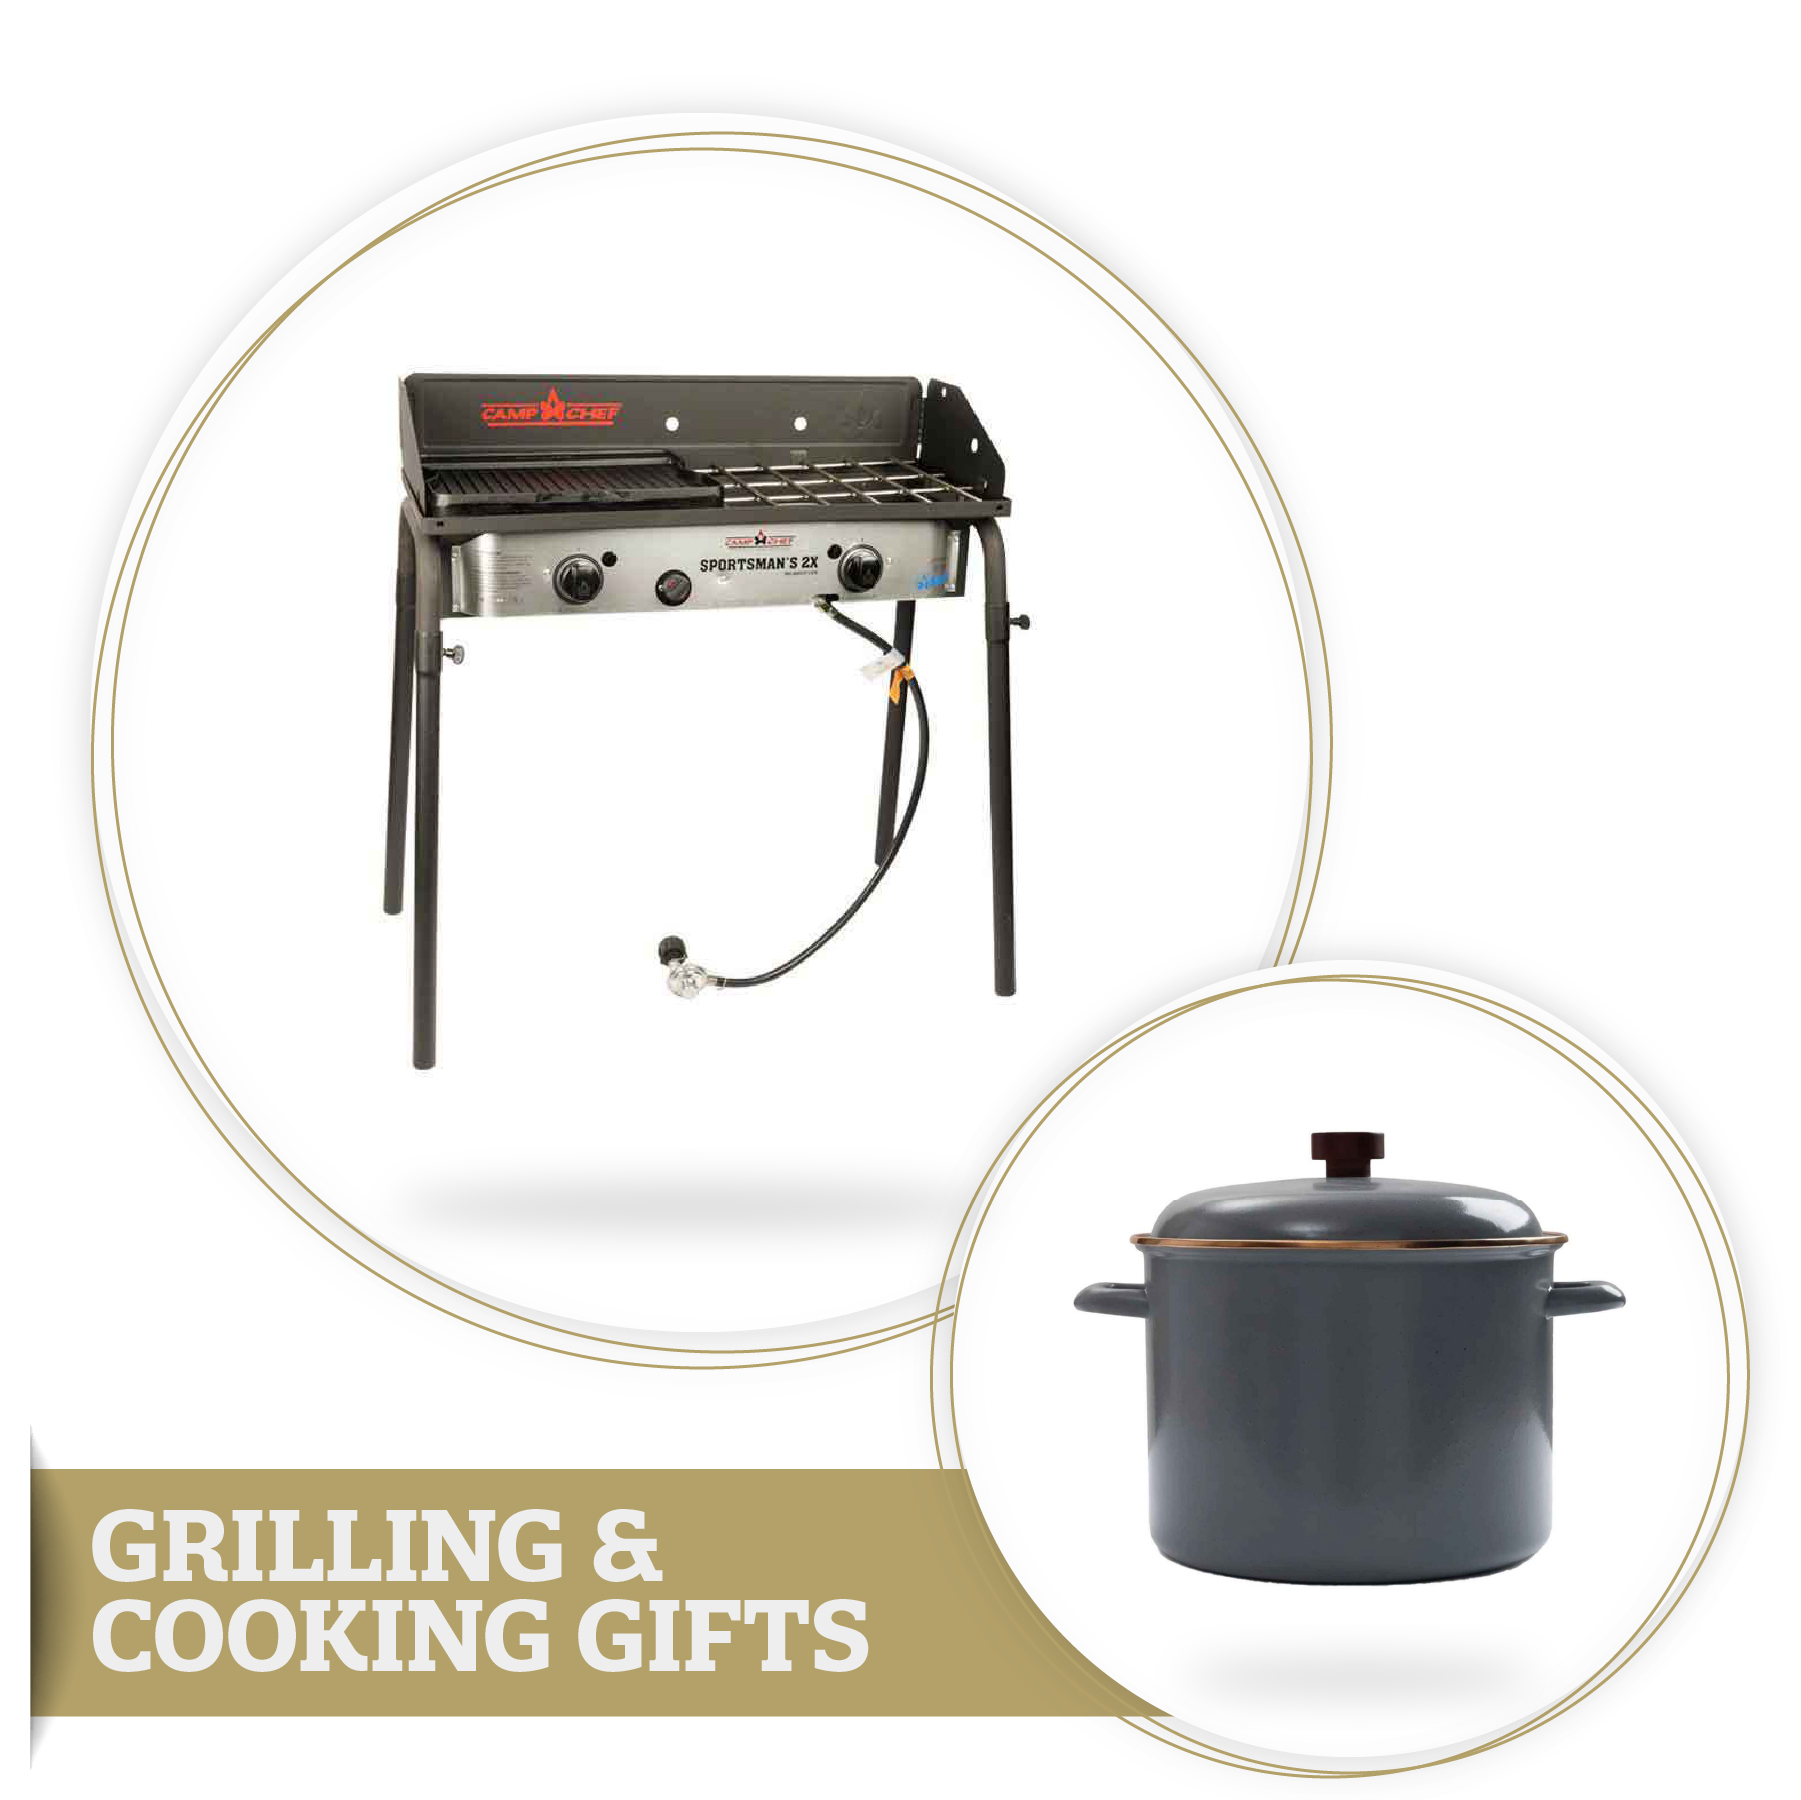 Gifts for Grilling & Cooking